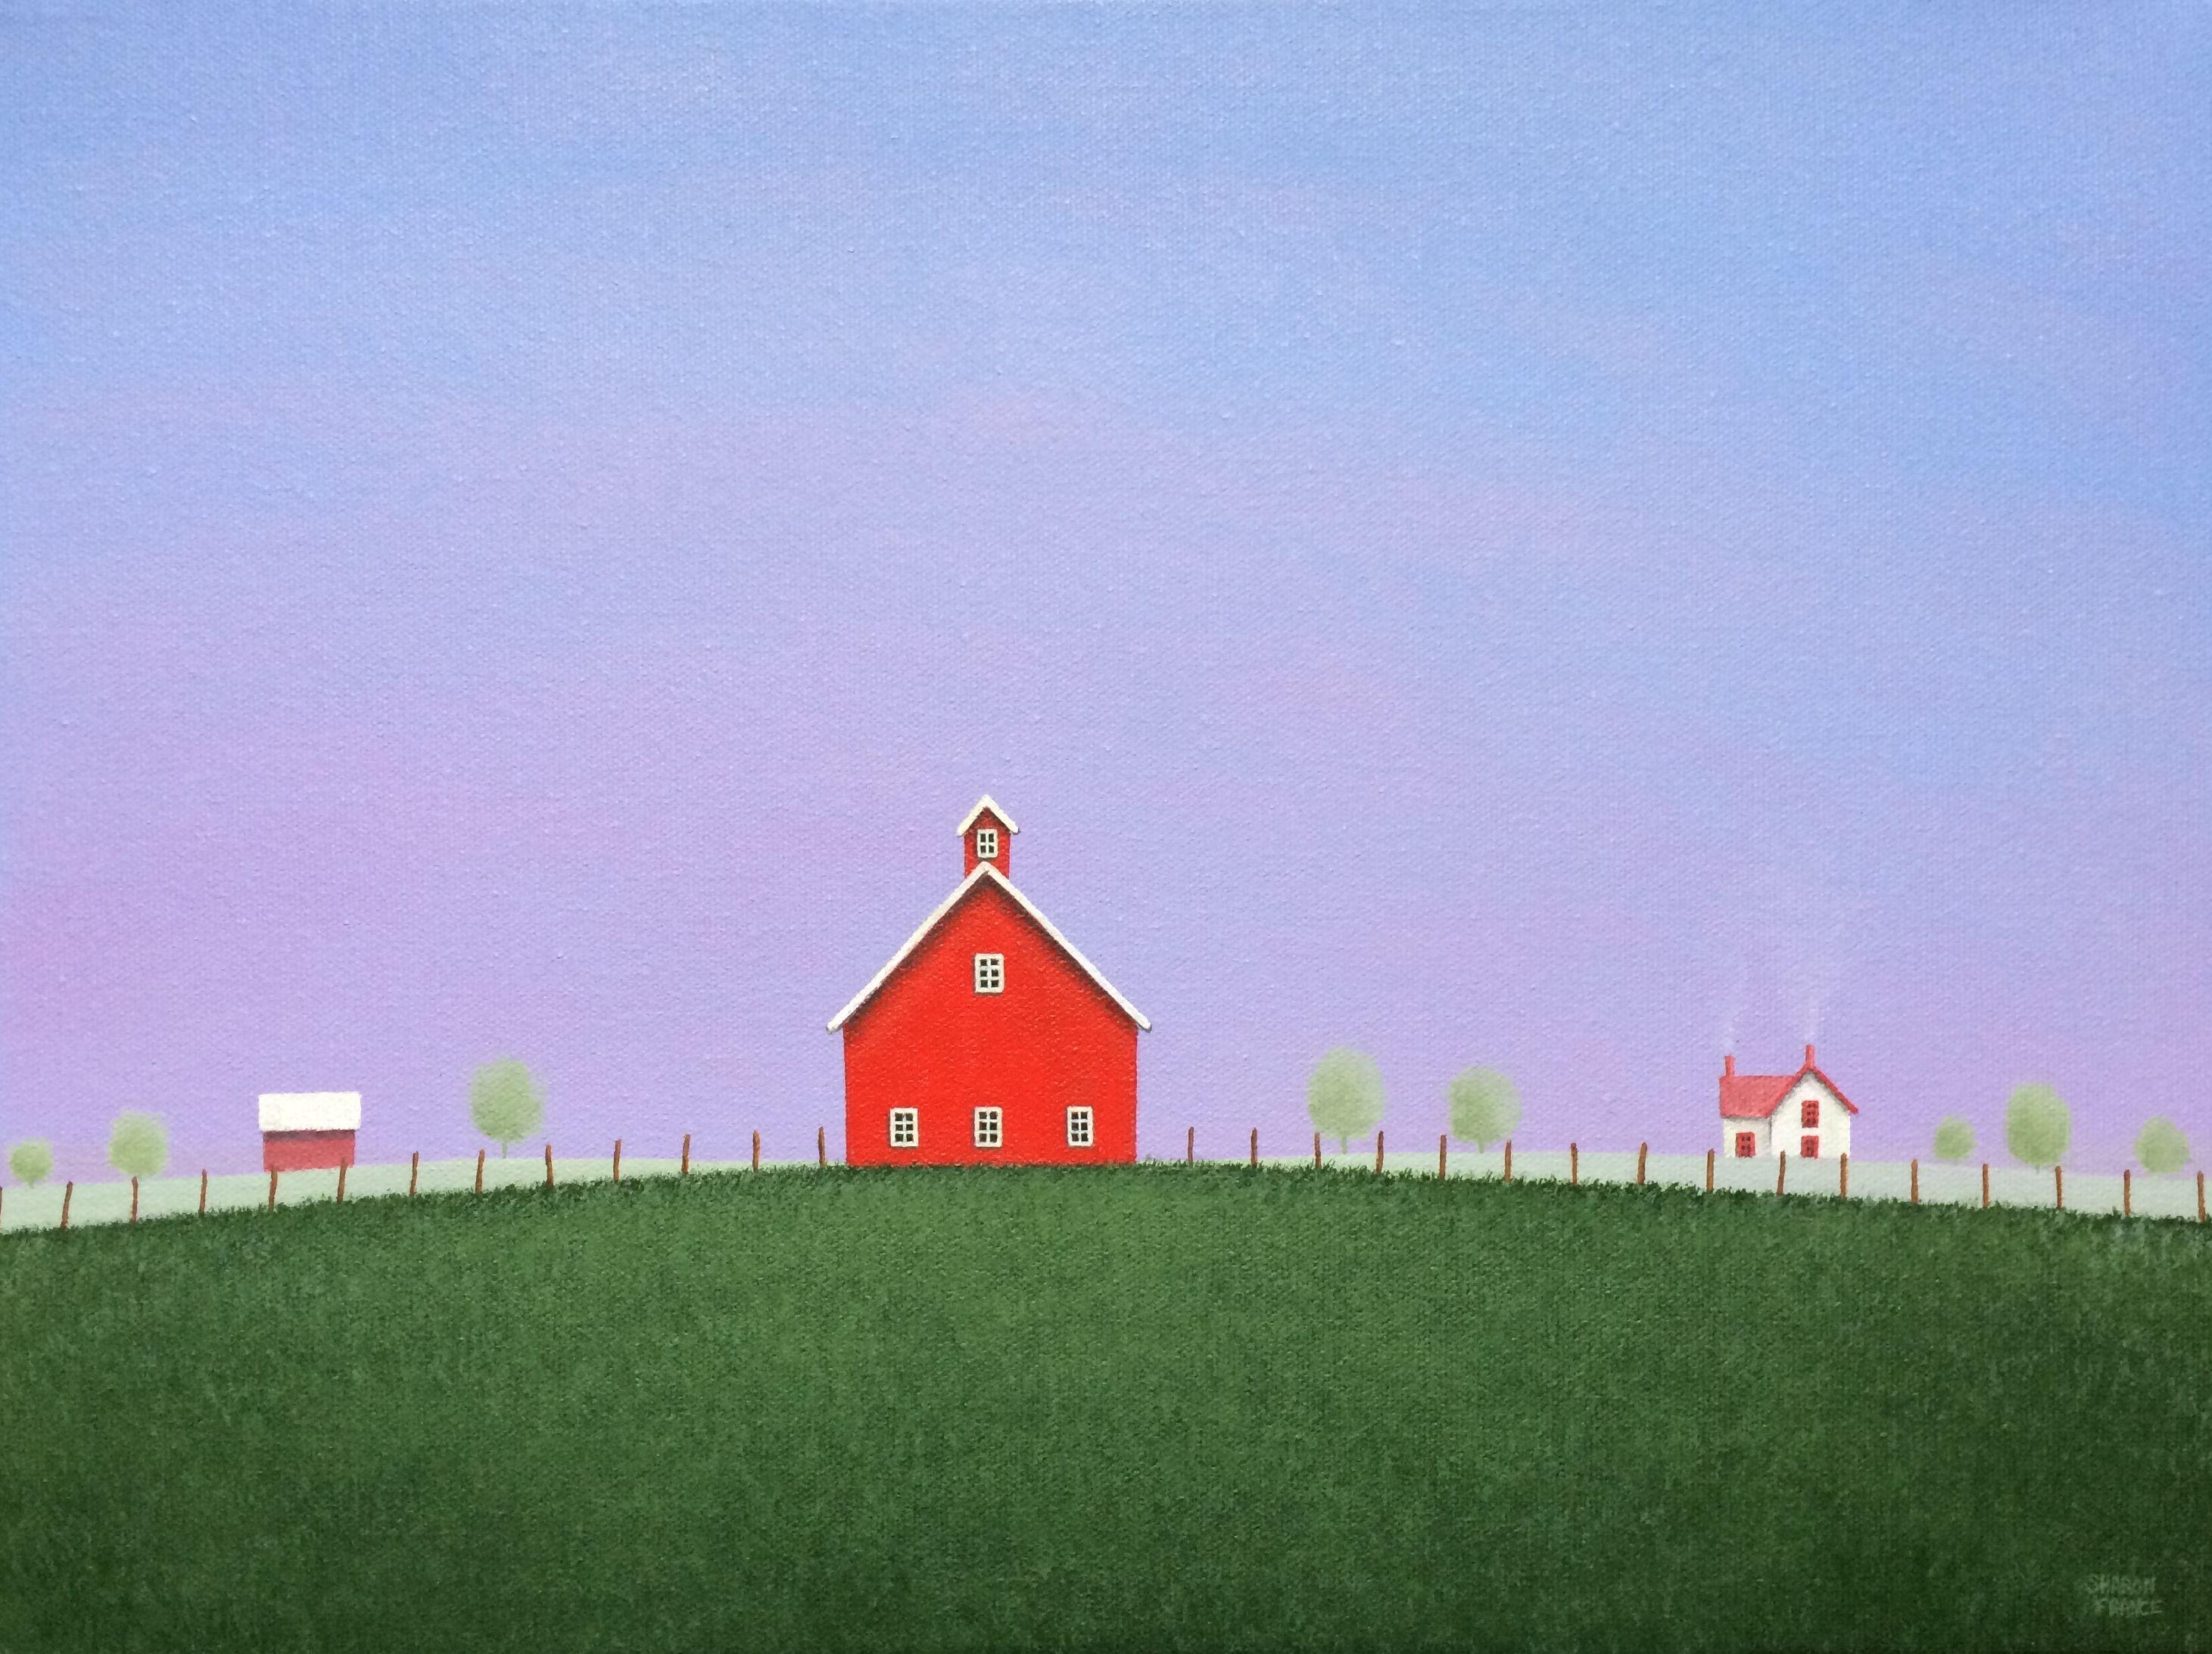 I painted this minimal farm scene of an old red barn and white farmhouse, with a deep pastel sky and green summer pasture. I wanted to give a feeling of peacefulness in this simple landscape painting. The canvas wrapped sides are painted to match